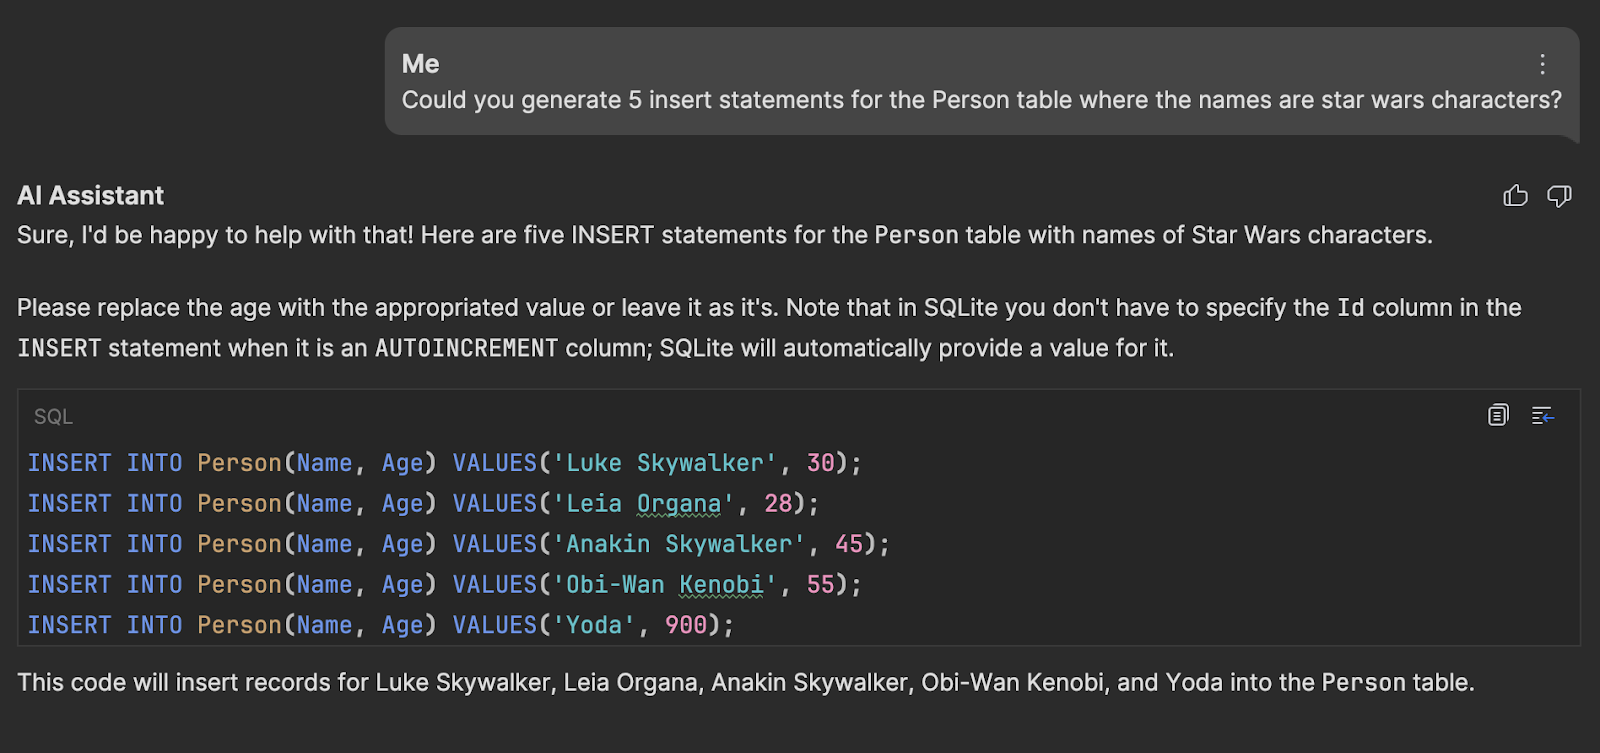 SQL inserts recommended by AI Chat